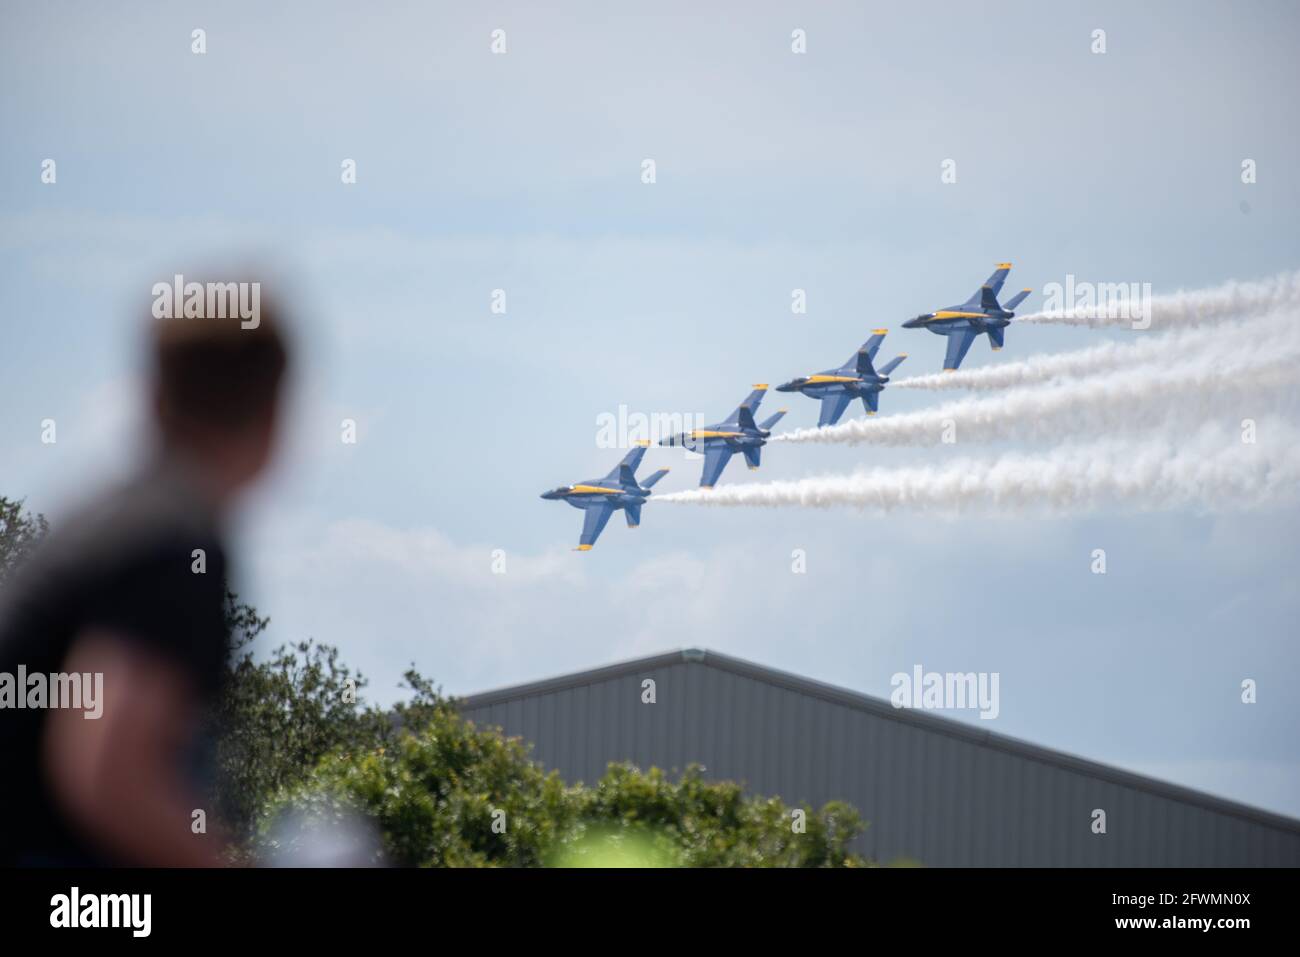 Onlooker Watching the Blue Angels Perform at an Airshow Stock Photo